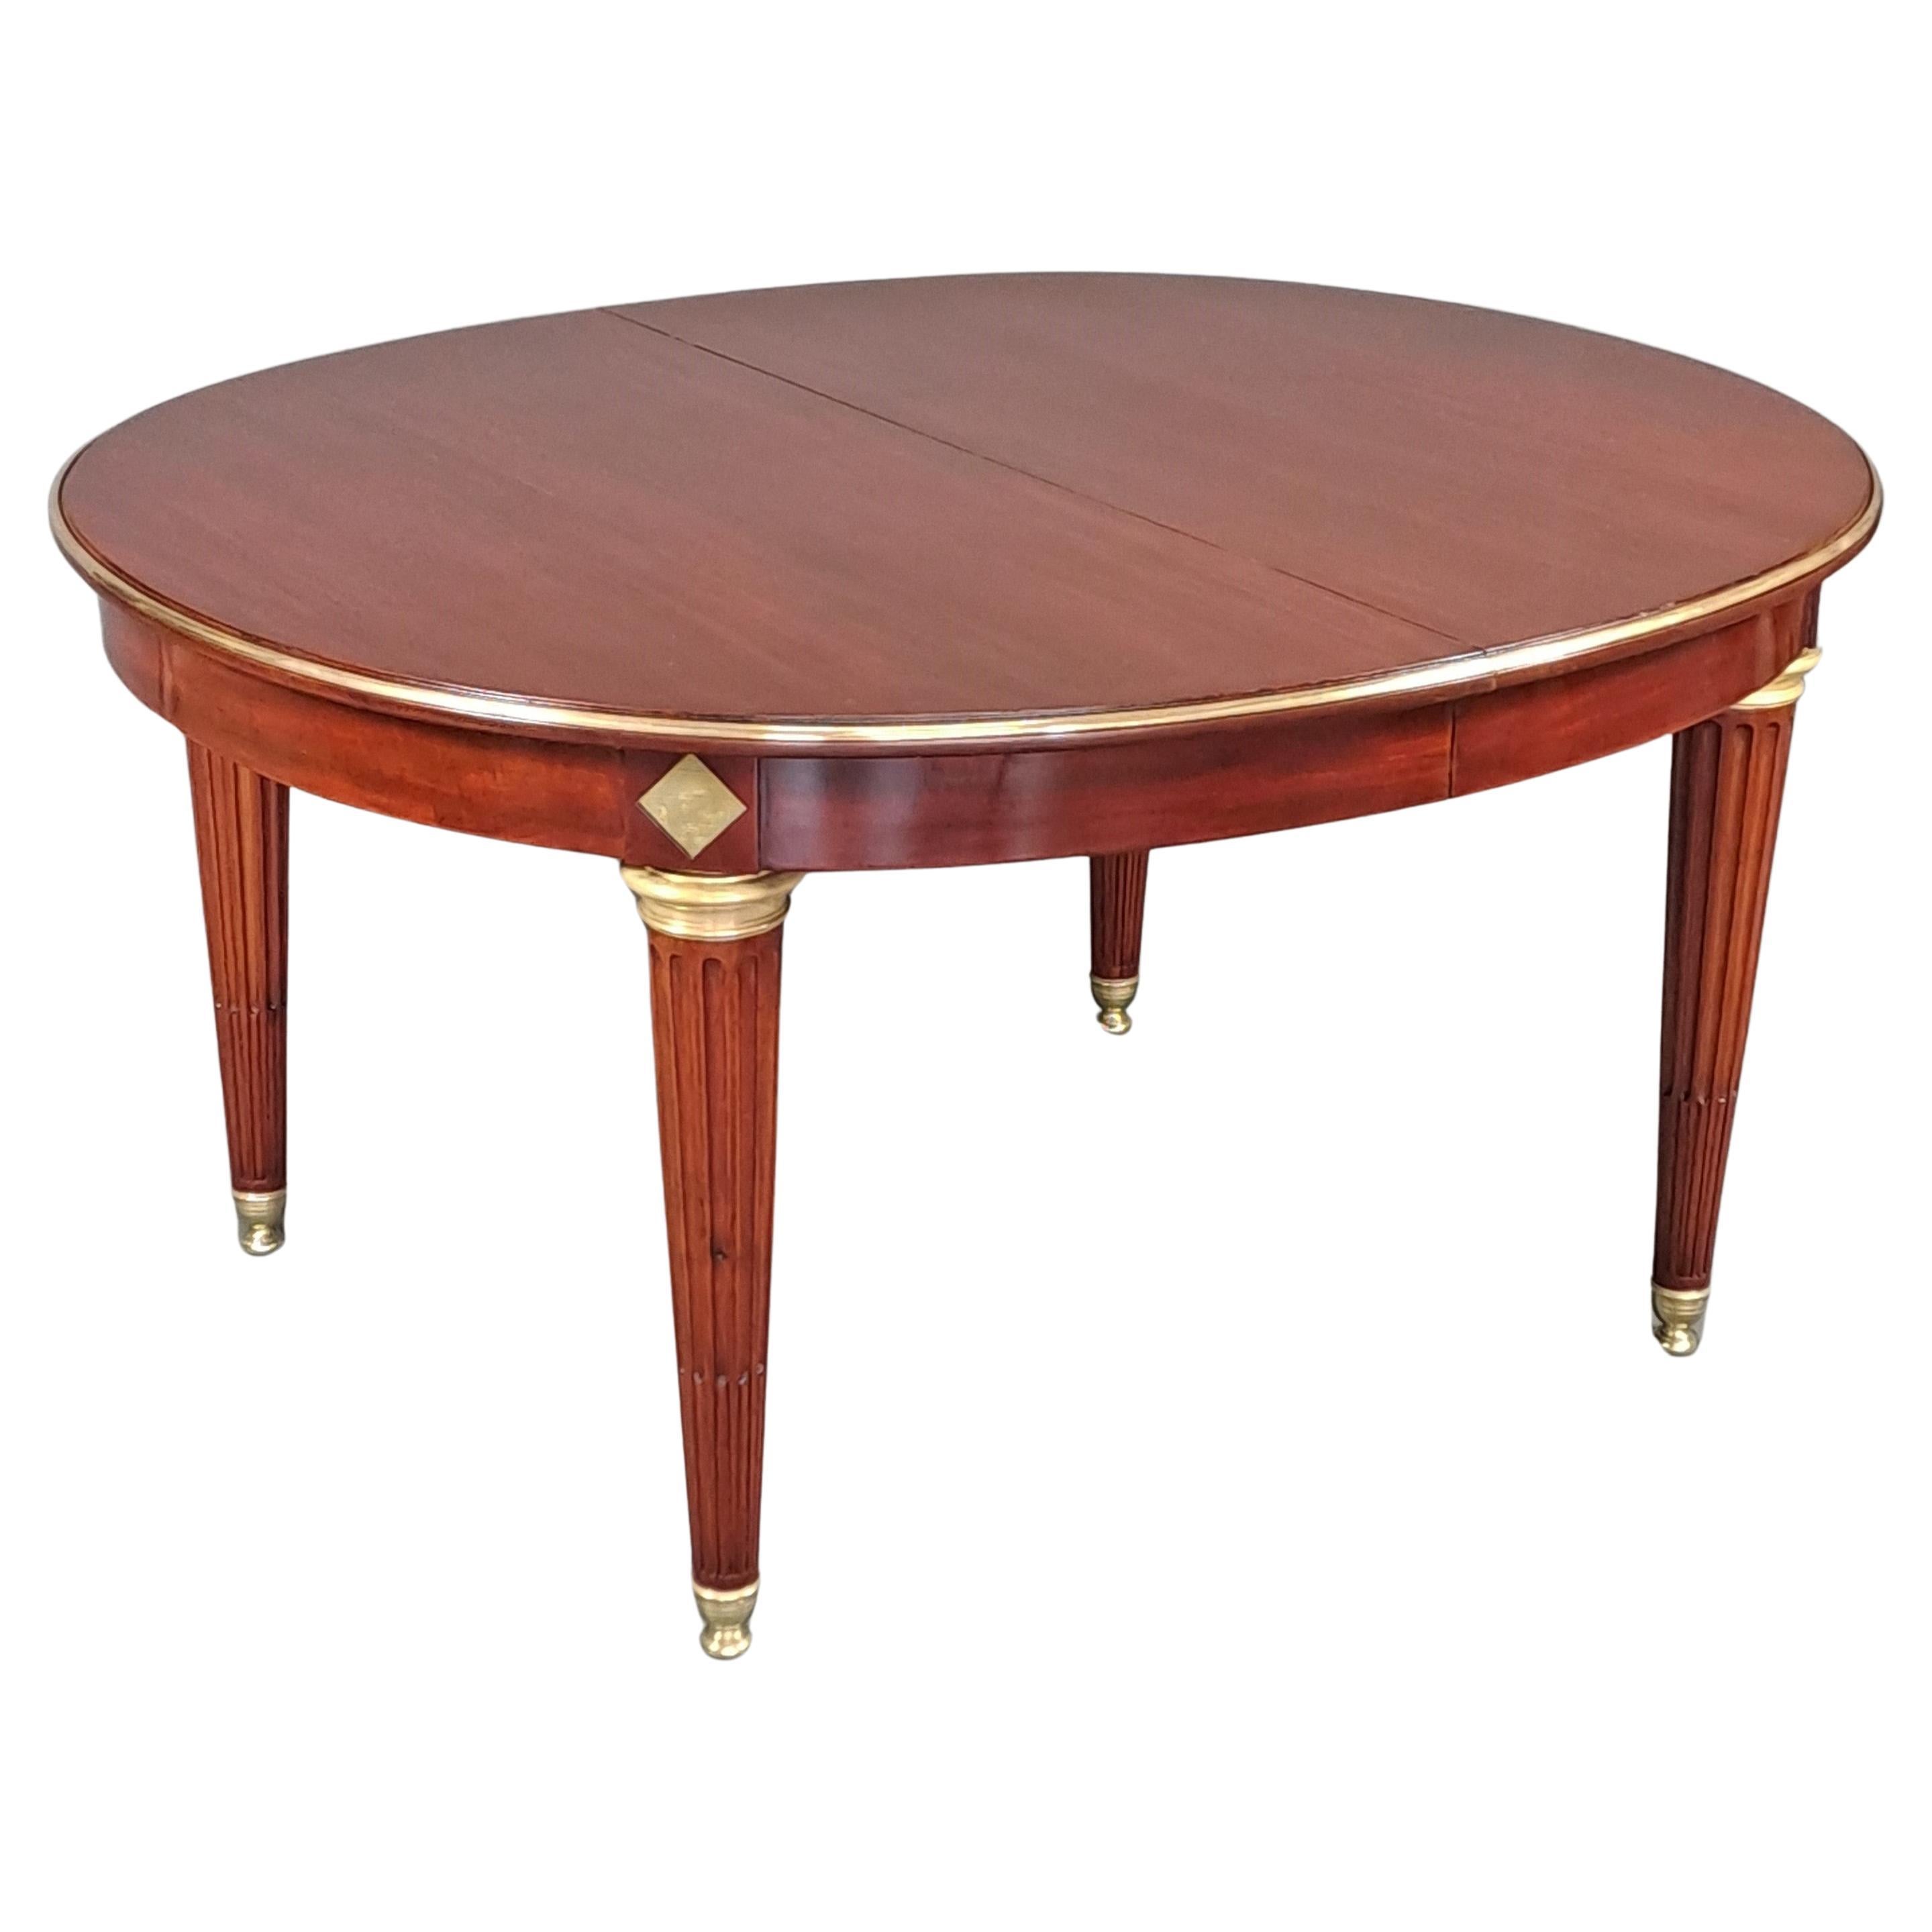 Louis XVI Style Dining Room Table In Mahogany And Gilt Bronze